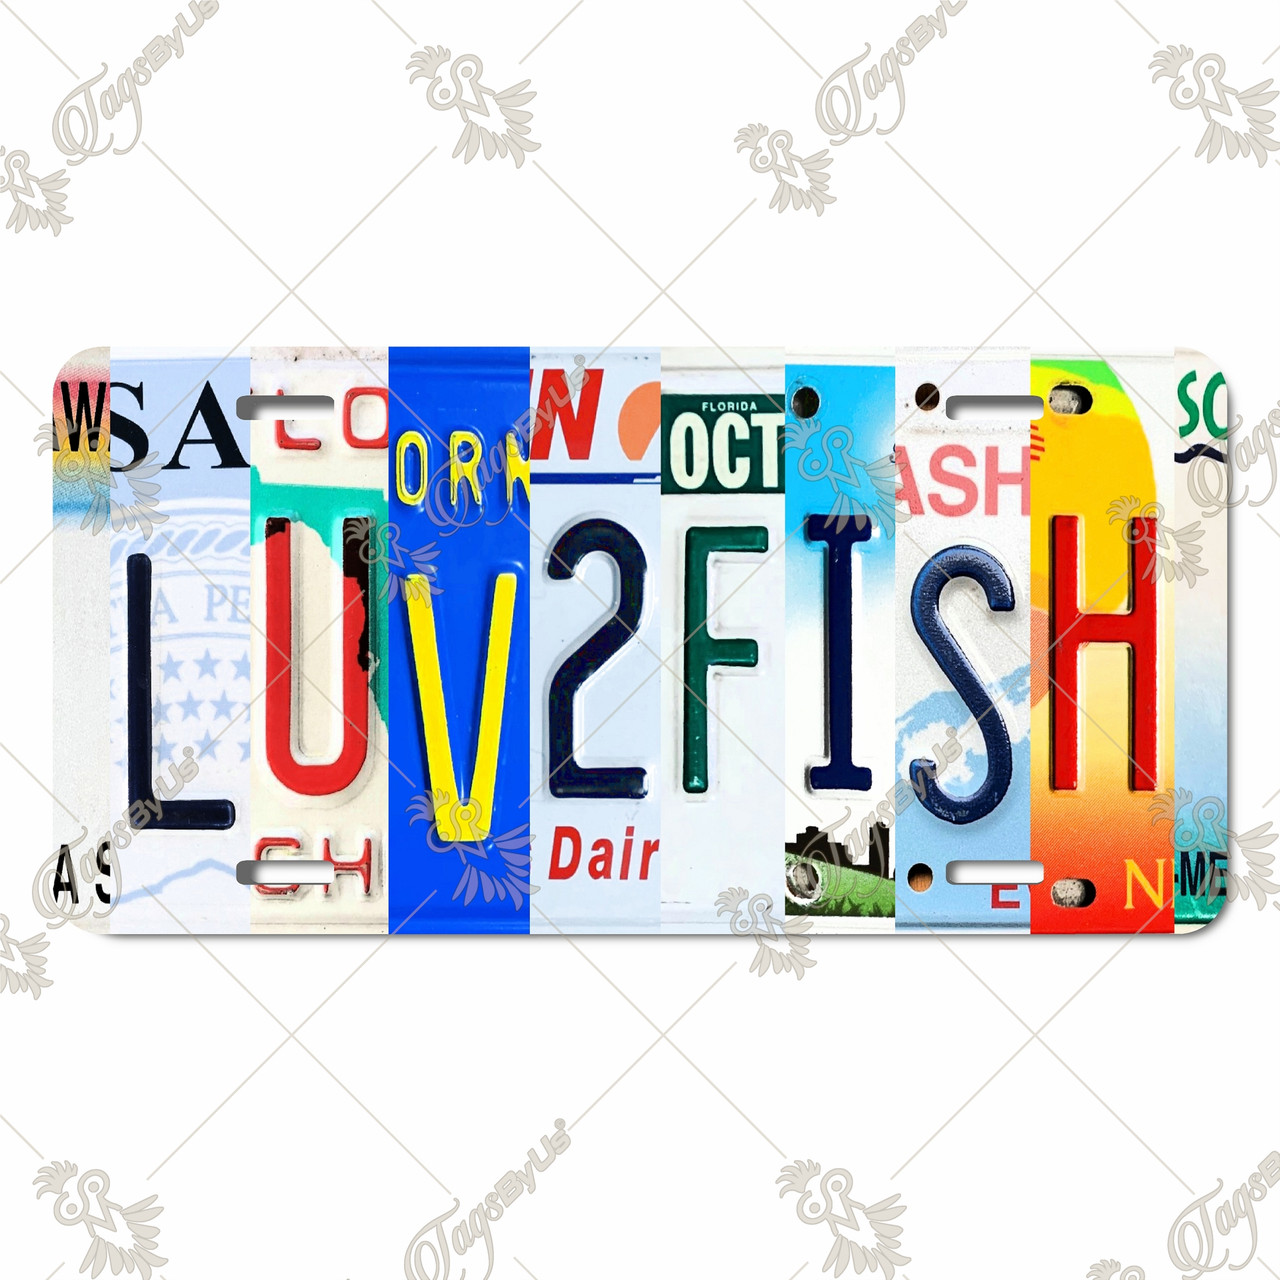 Love To Fish Letter Art Car Tags - Low Prices on Love To Fish License Plates